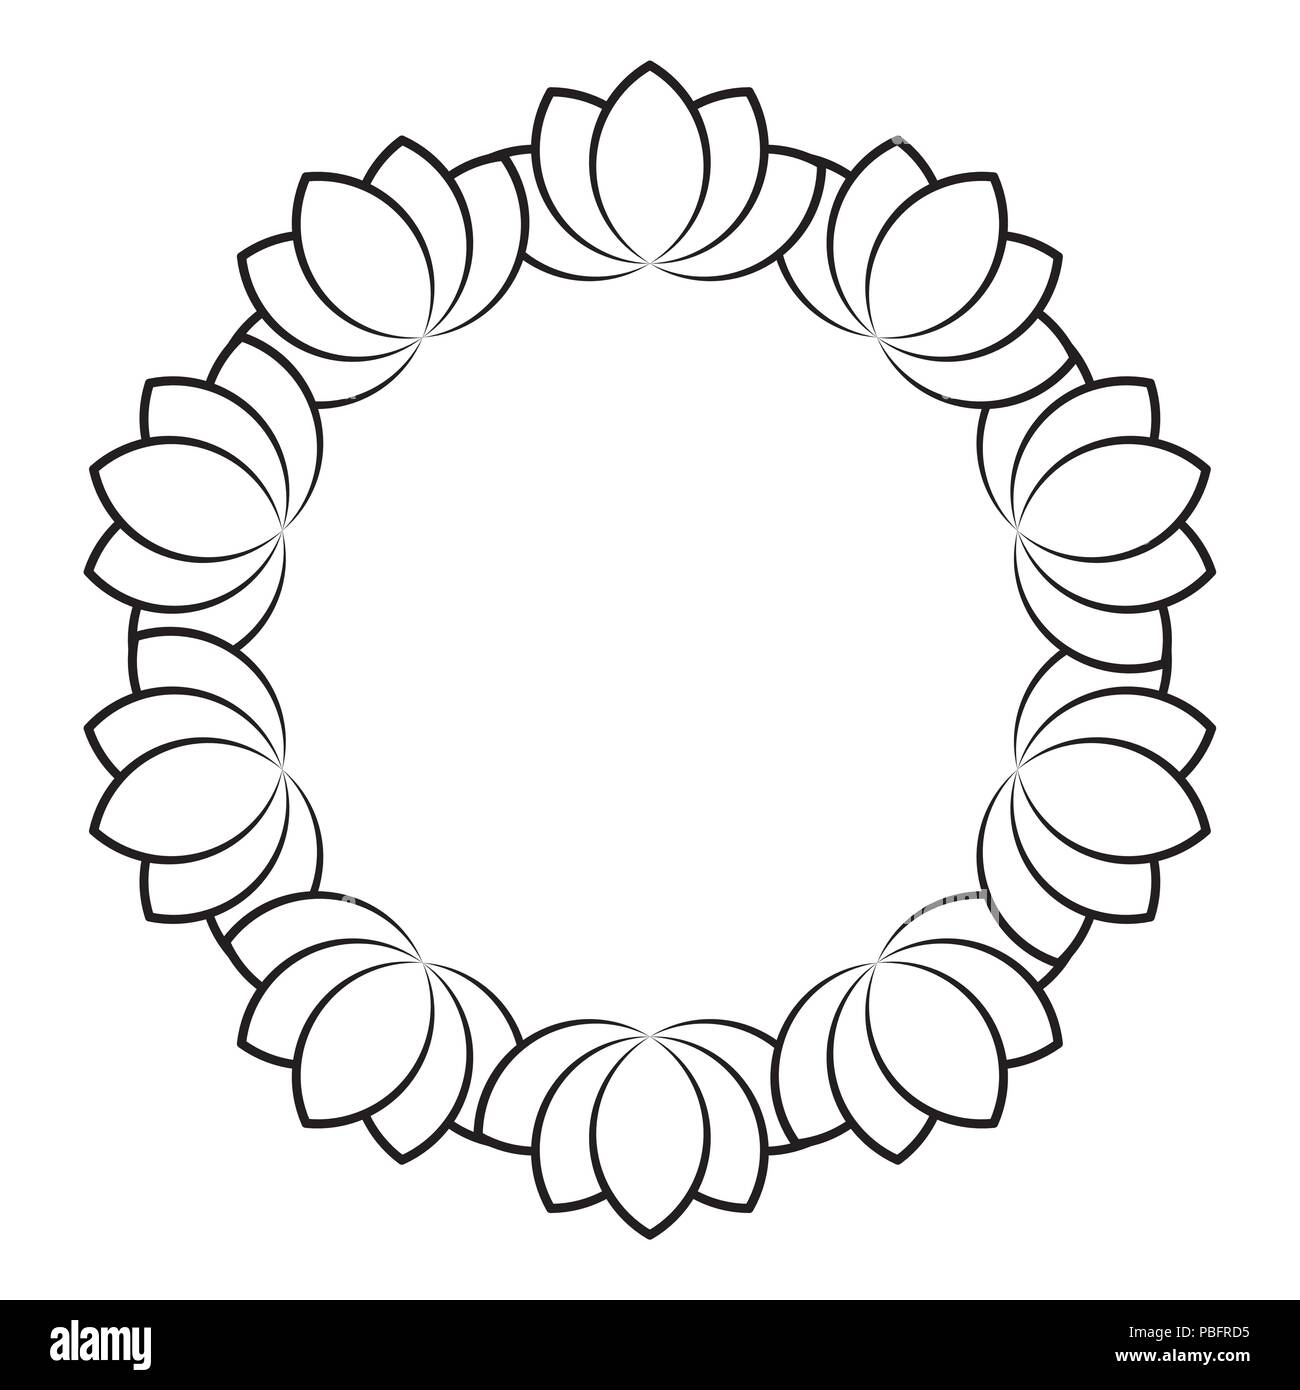 Set Of Black And White Hand Drawn Corner Floral Borders Design For